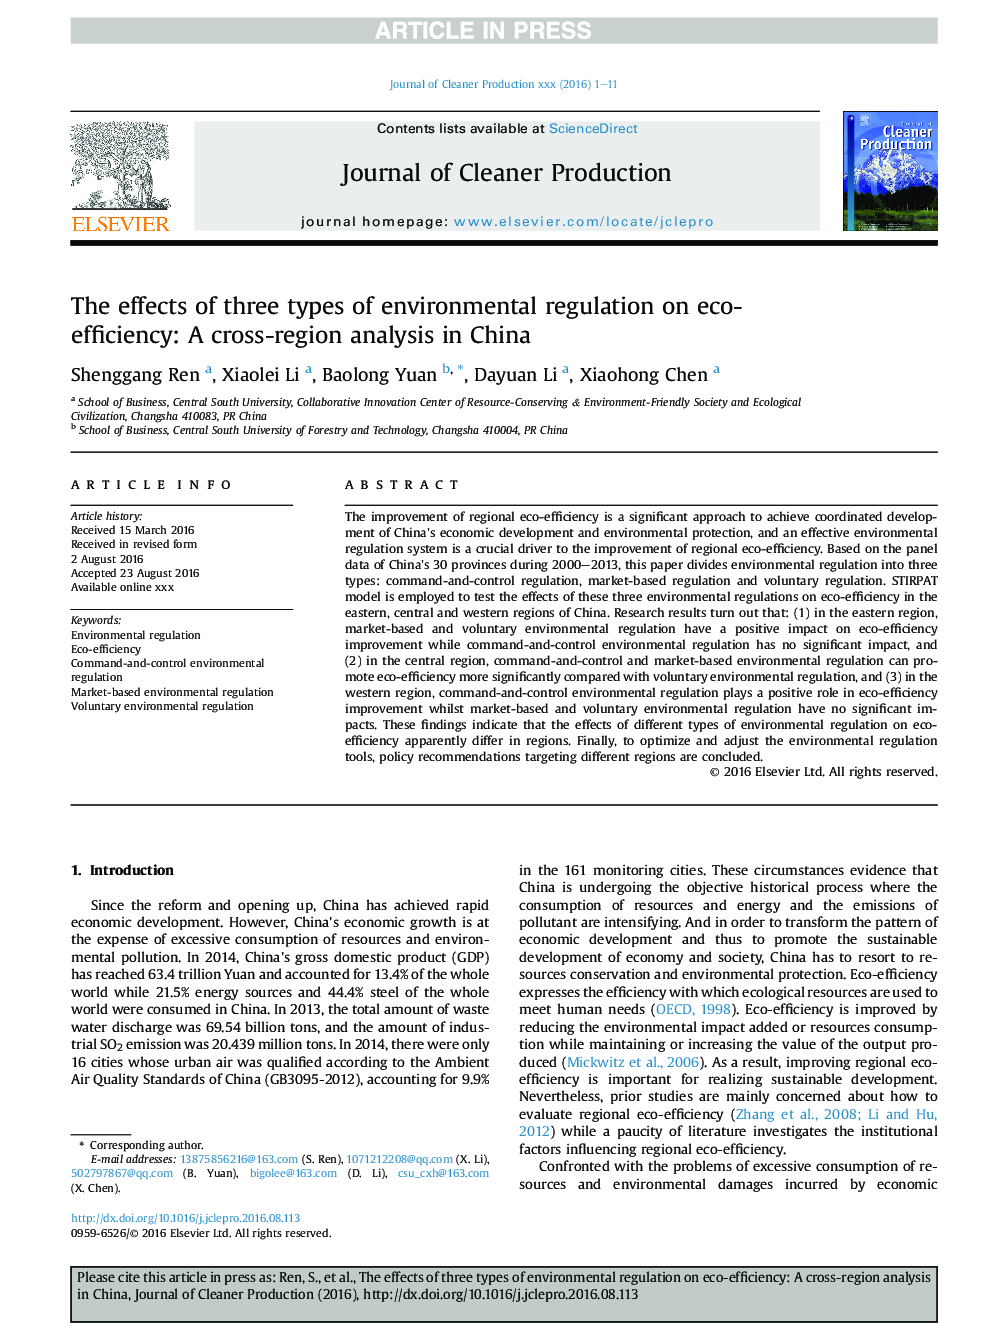 The effects of three types of environmental regulation on eco-efficiency: A cross-region analysis in China